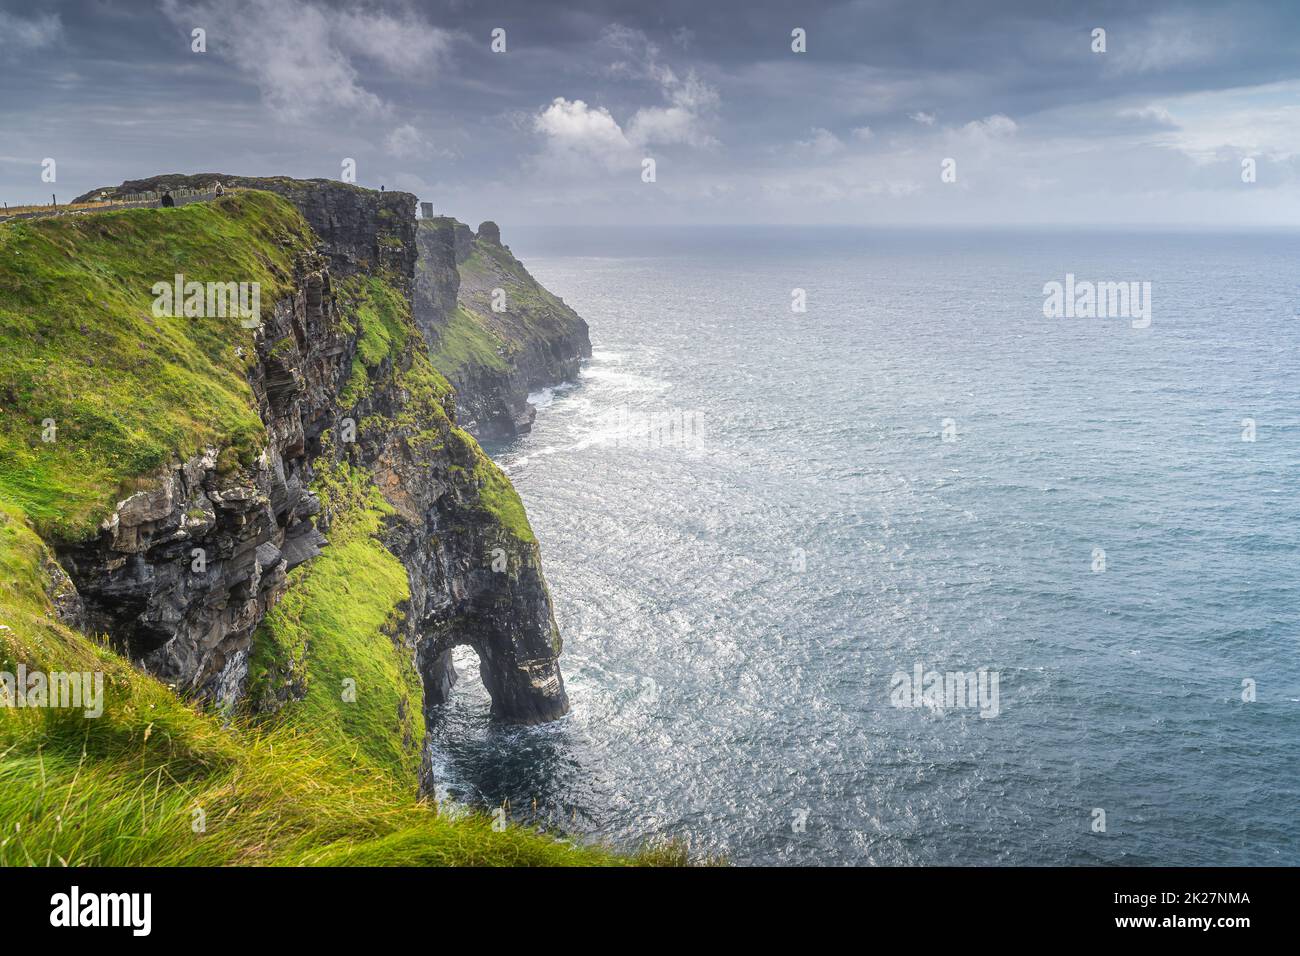 Natural rock arch, part of iconic Cliffs of Moher, Ireland Stock Photo